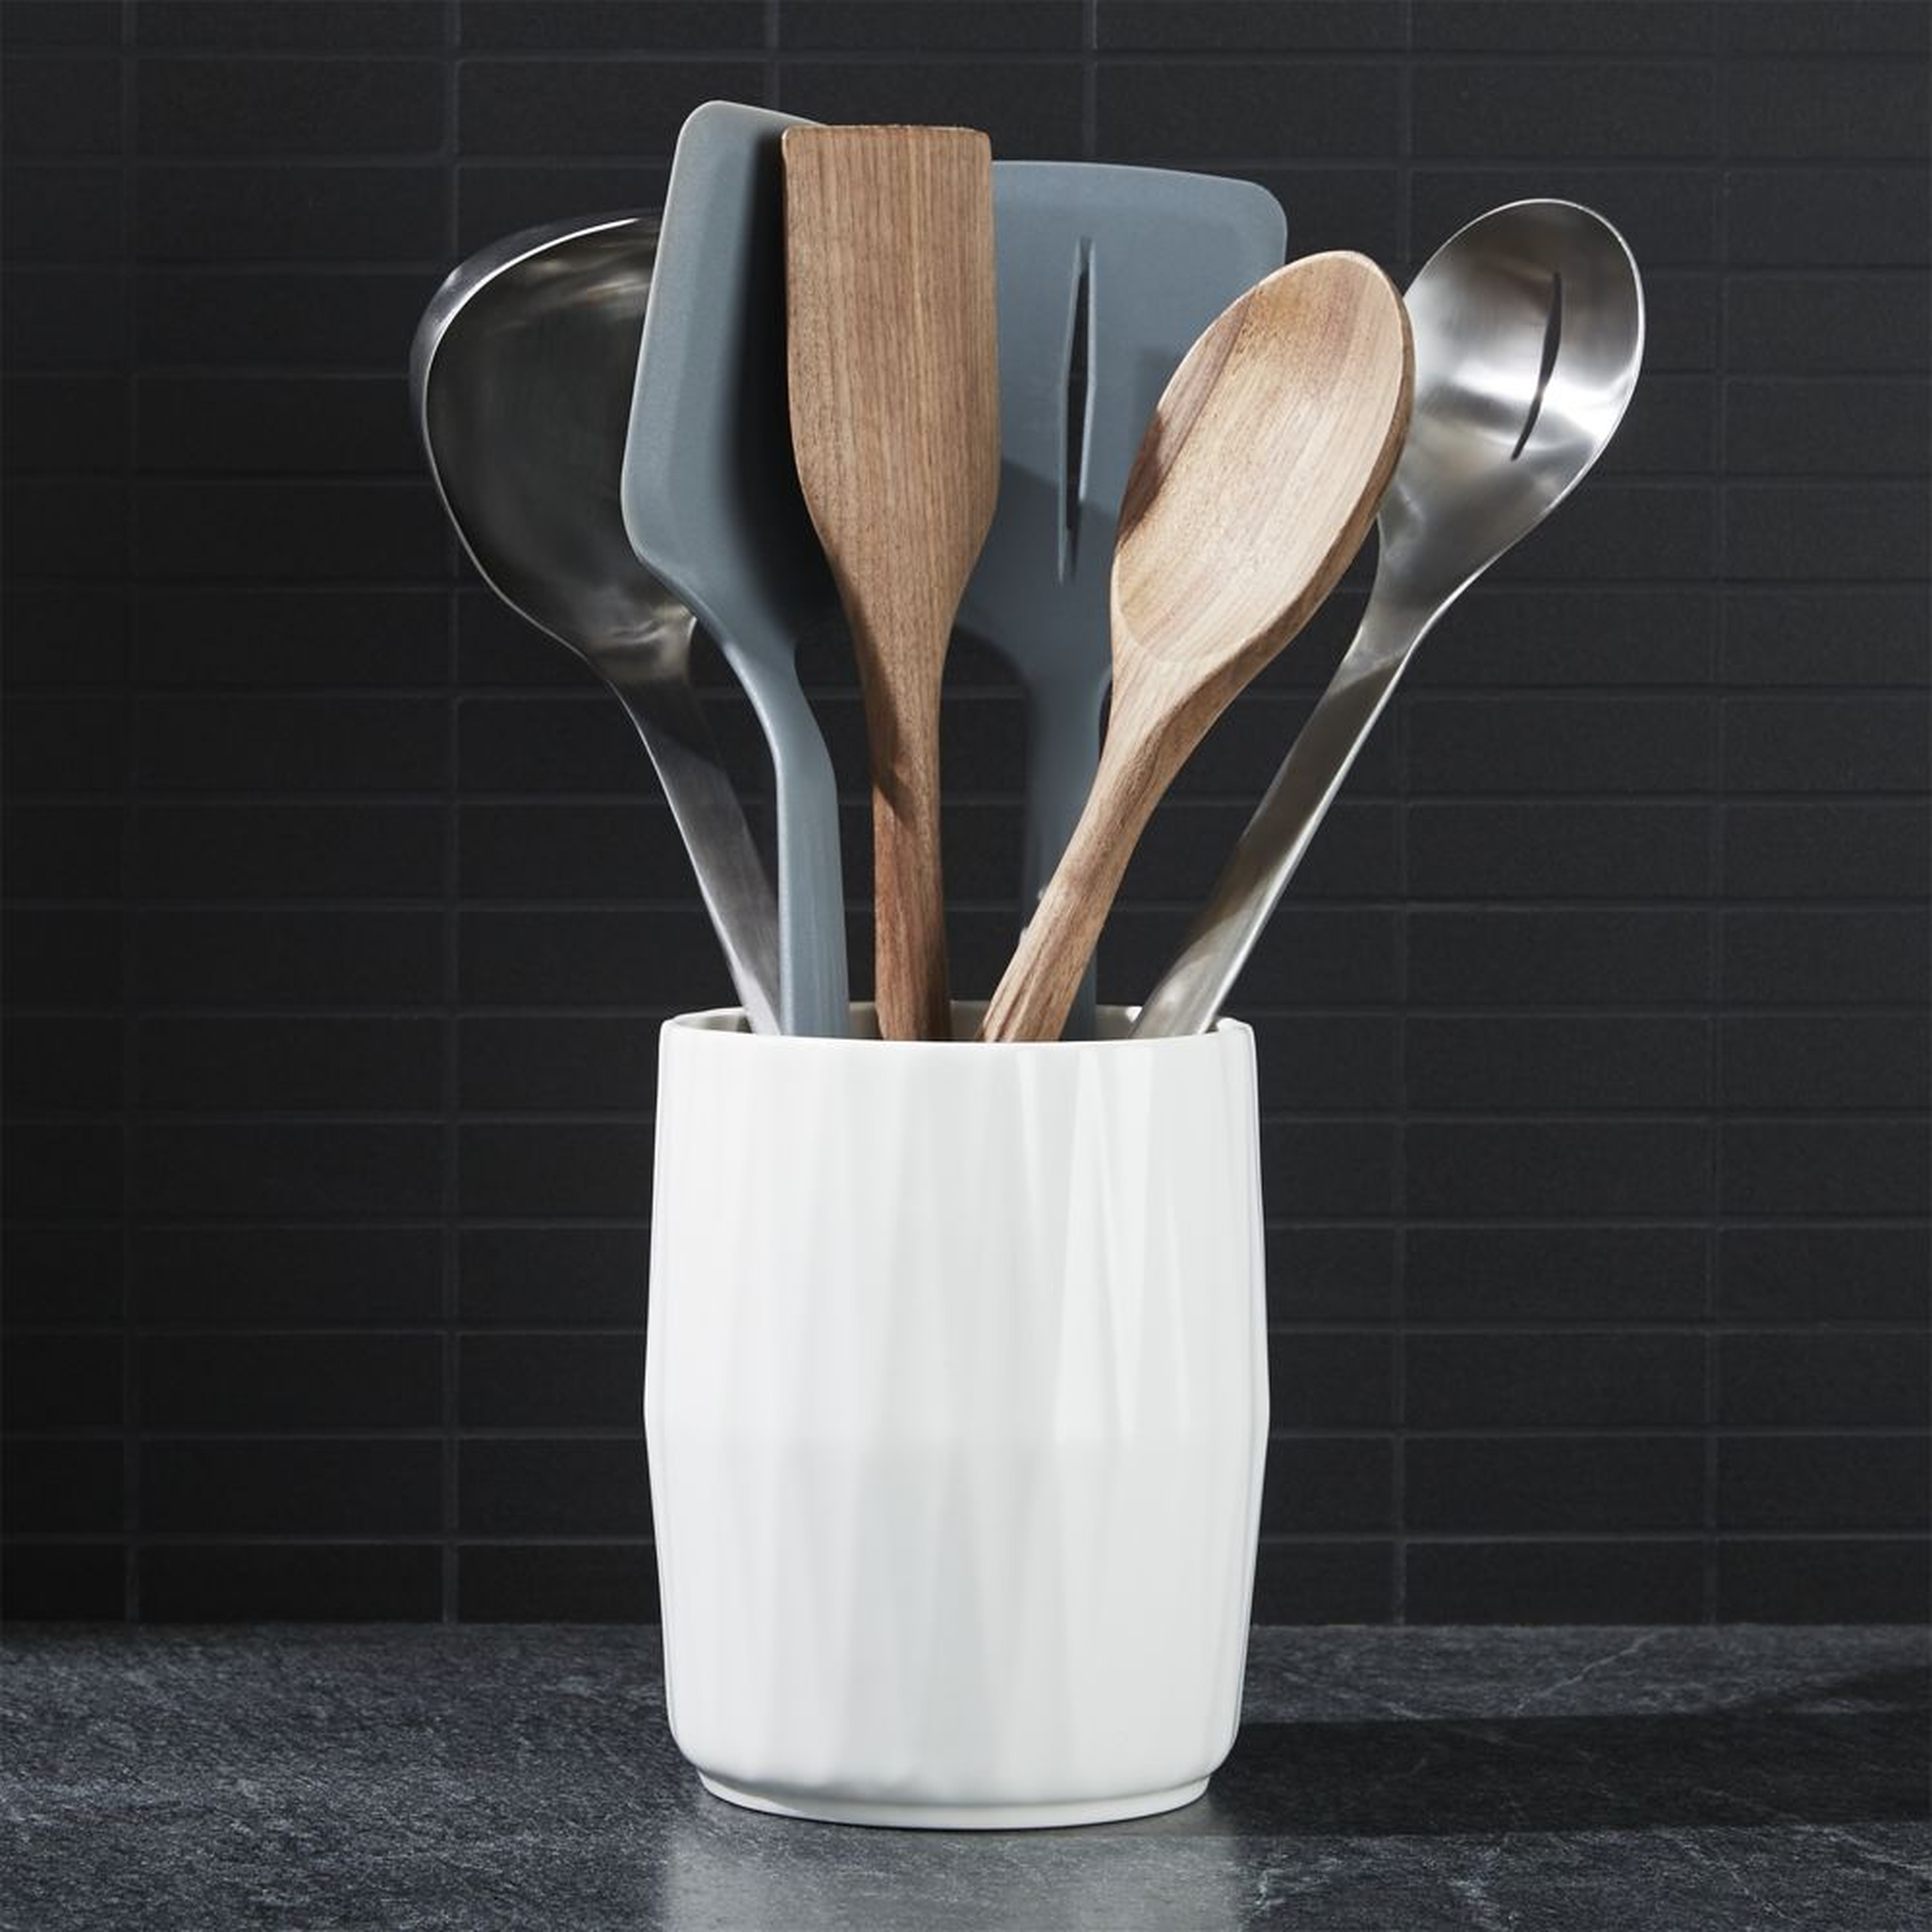 Chef'n 7-Piece Tool Set And Crock - Crate and Barrel